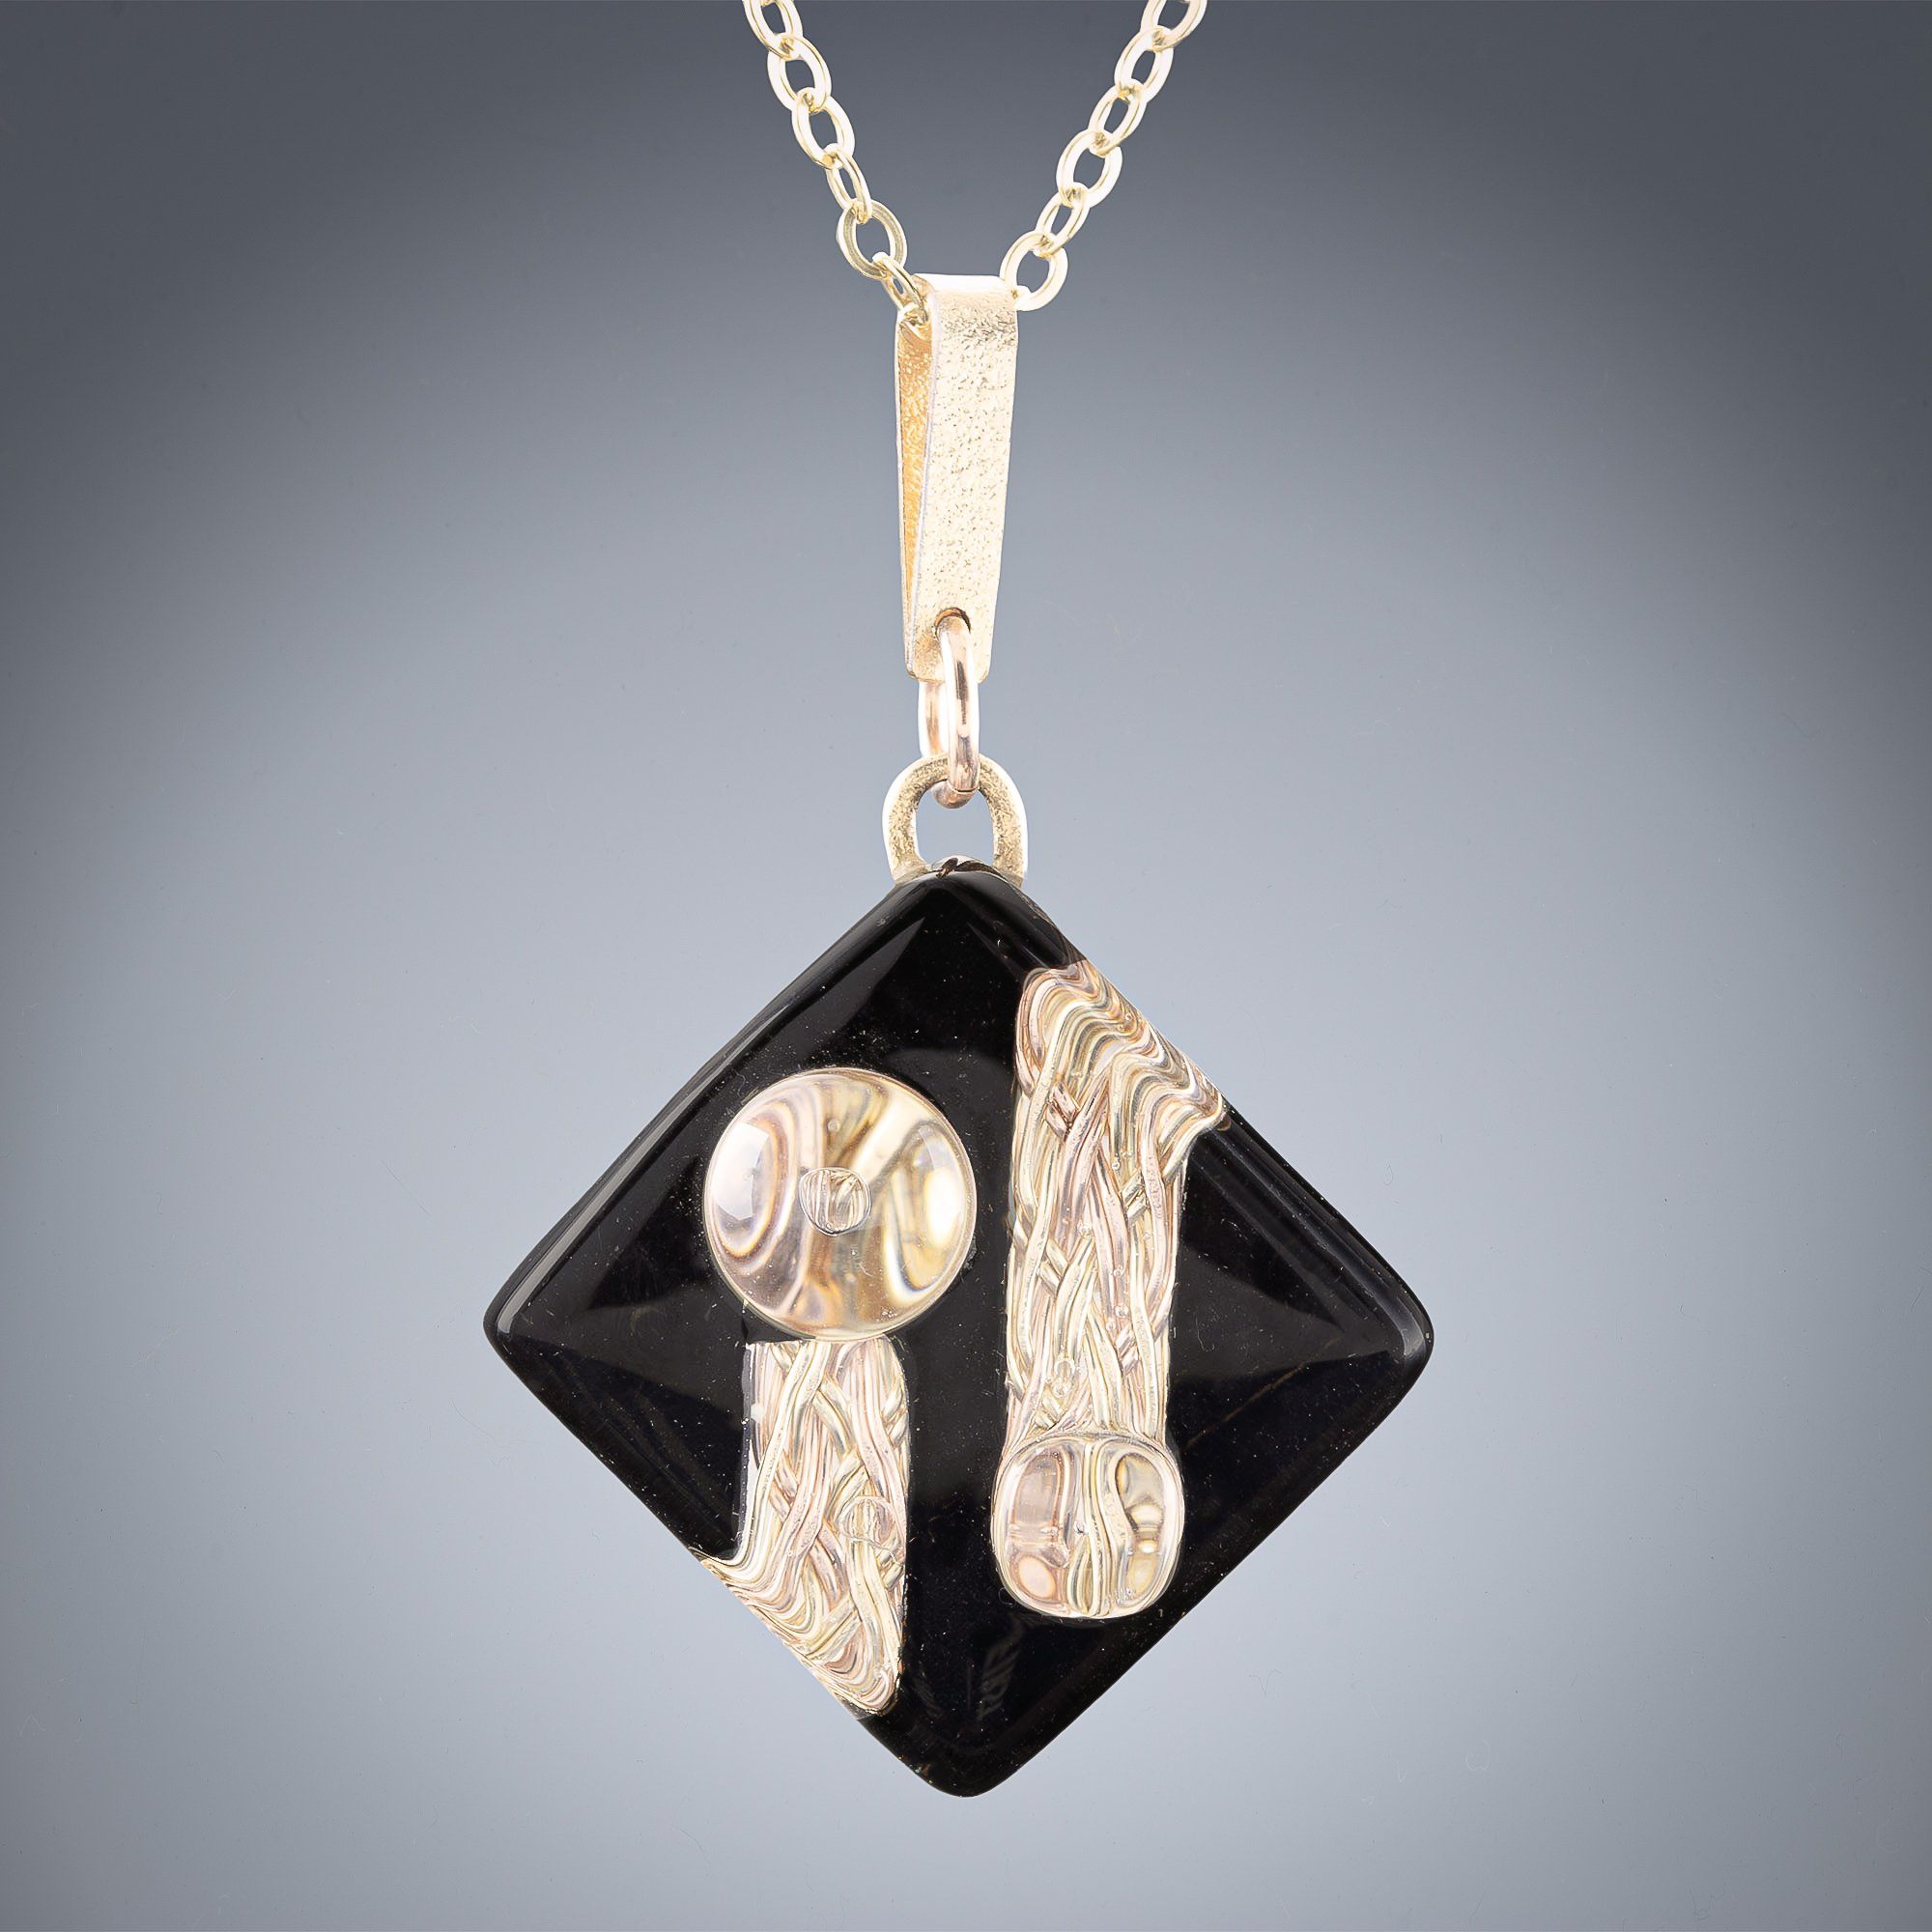 Large Black and Gold Art Deco Inspired Pendant Necklace in both 14K Yellow and Rose Gold Fill